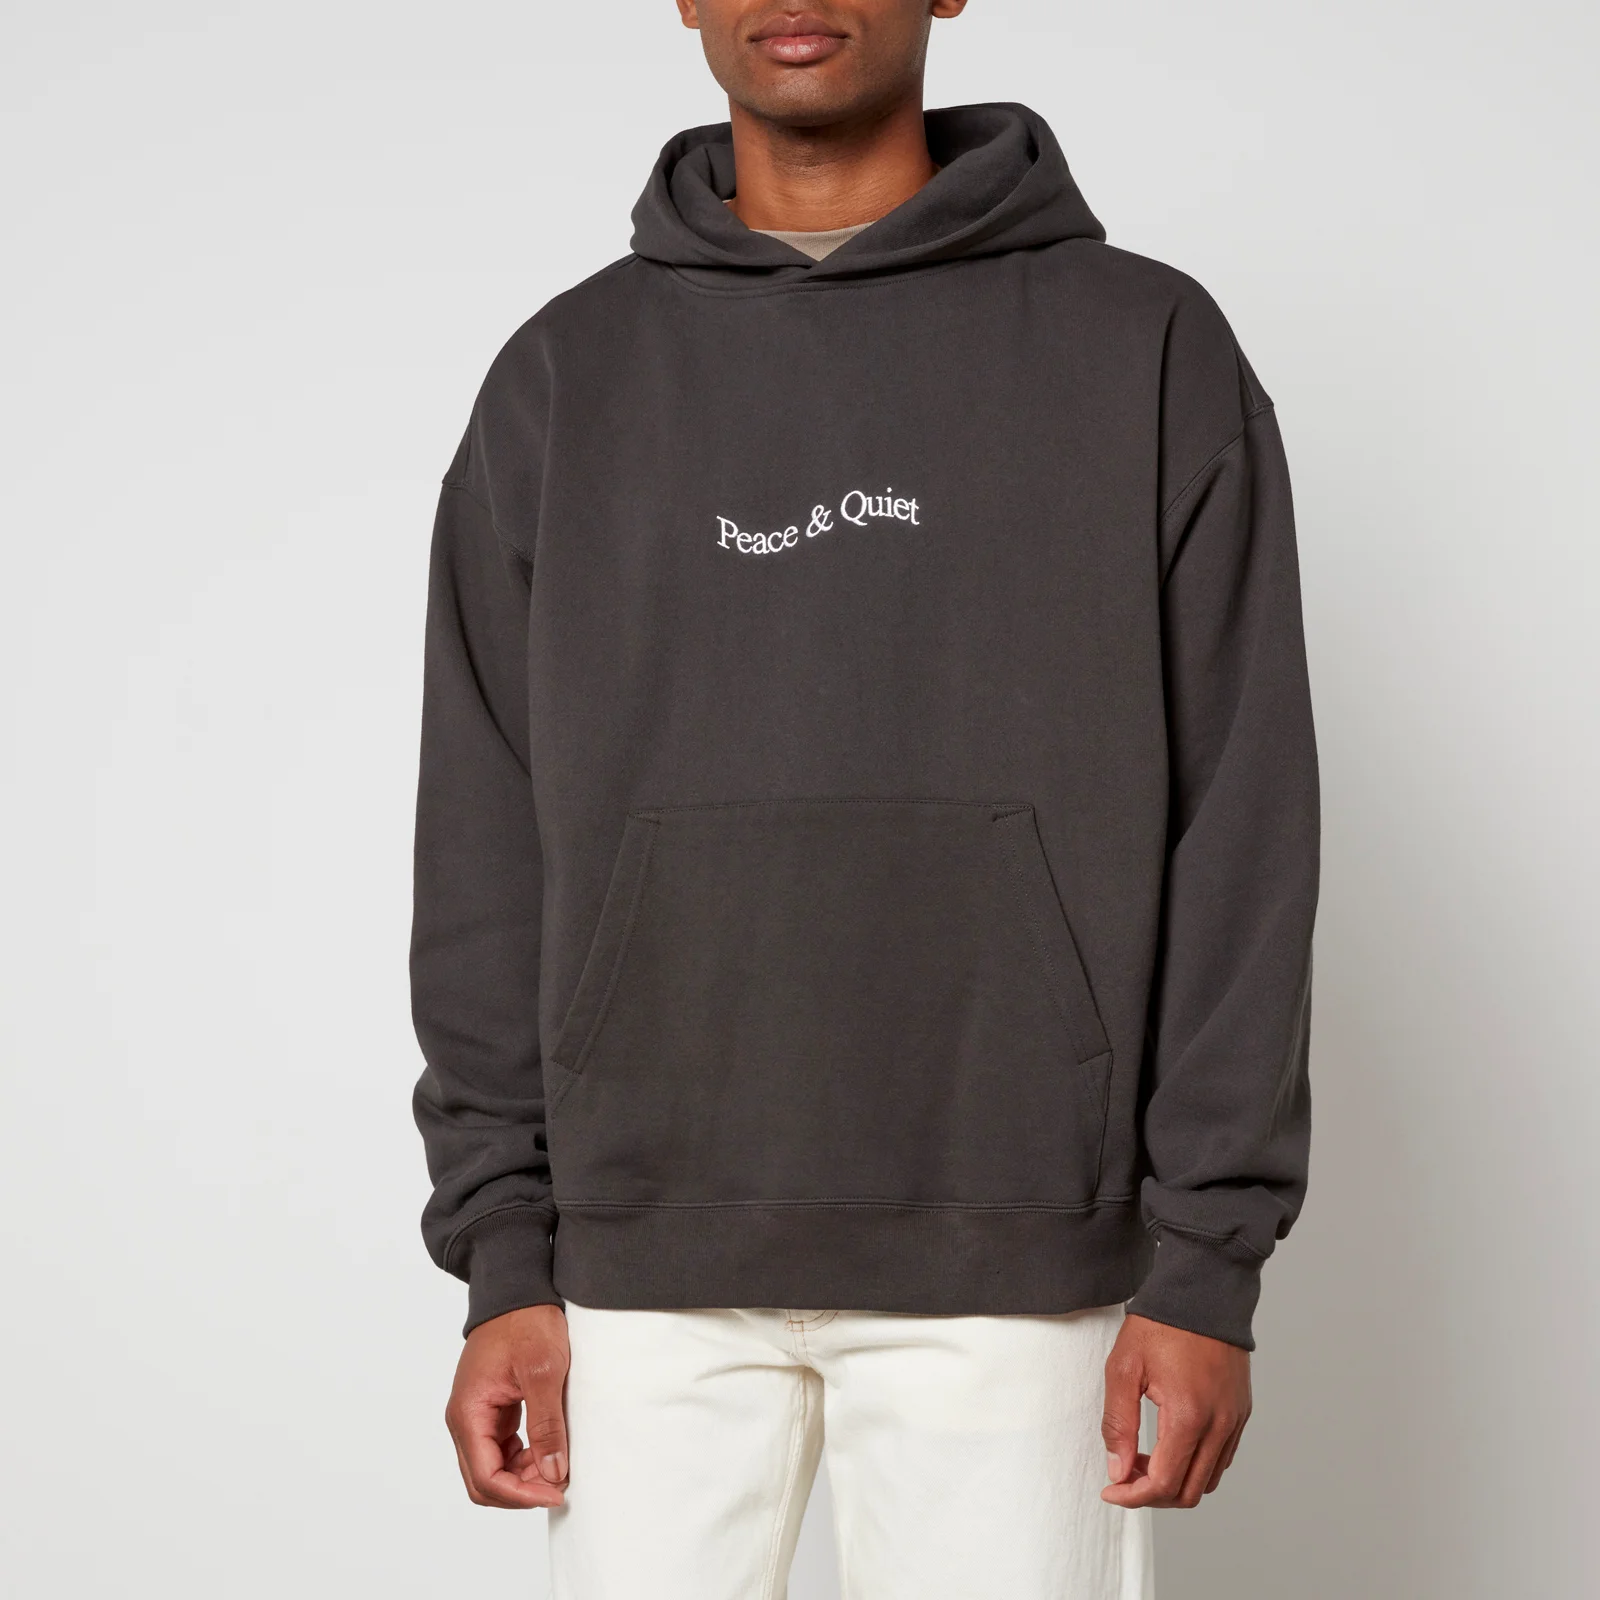 Museum of Peace and Quiet Wordmark Cotton Hoodie - L Image 1